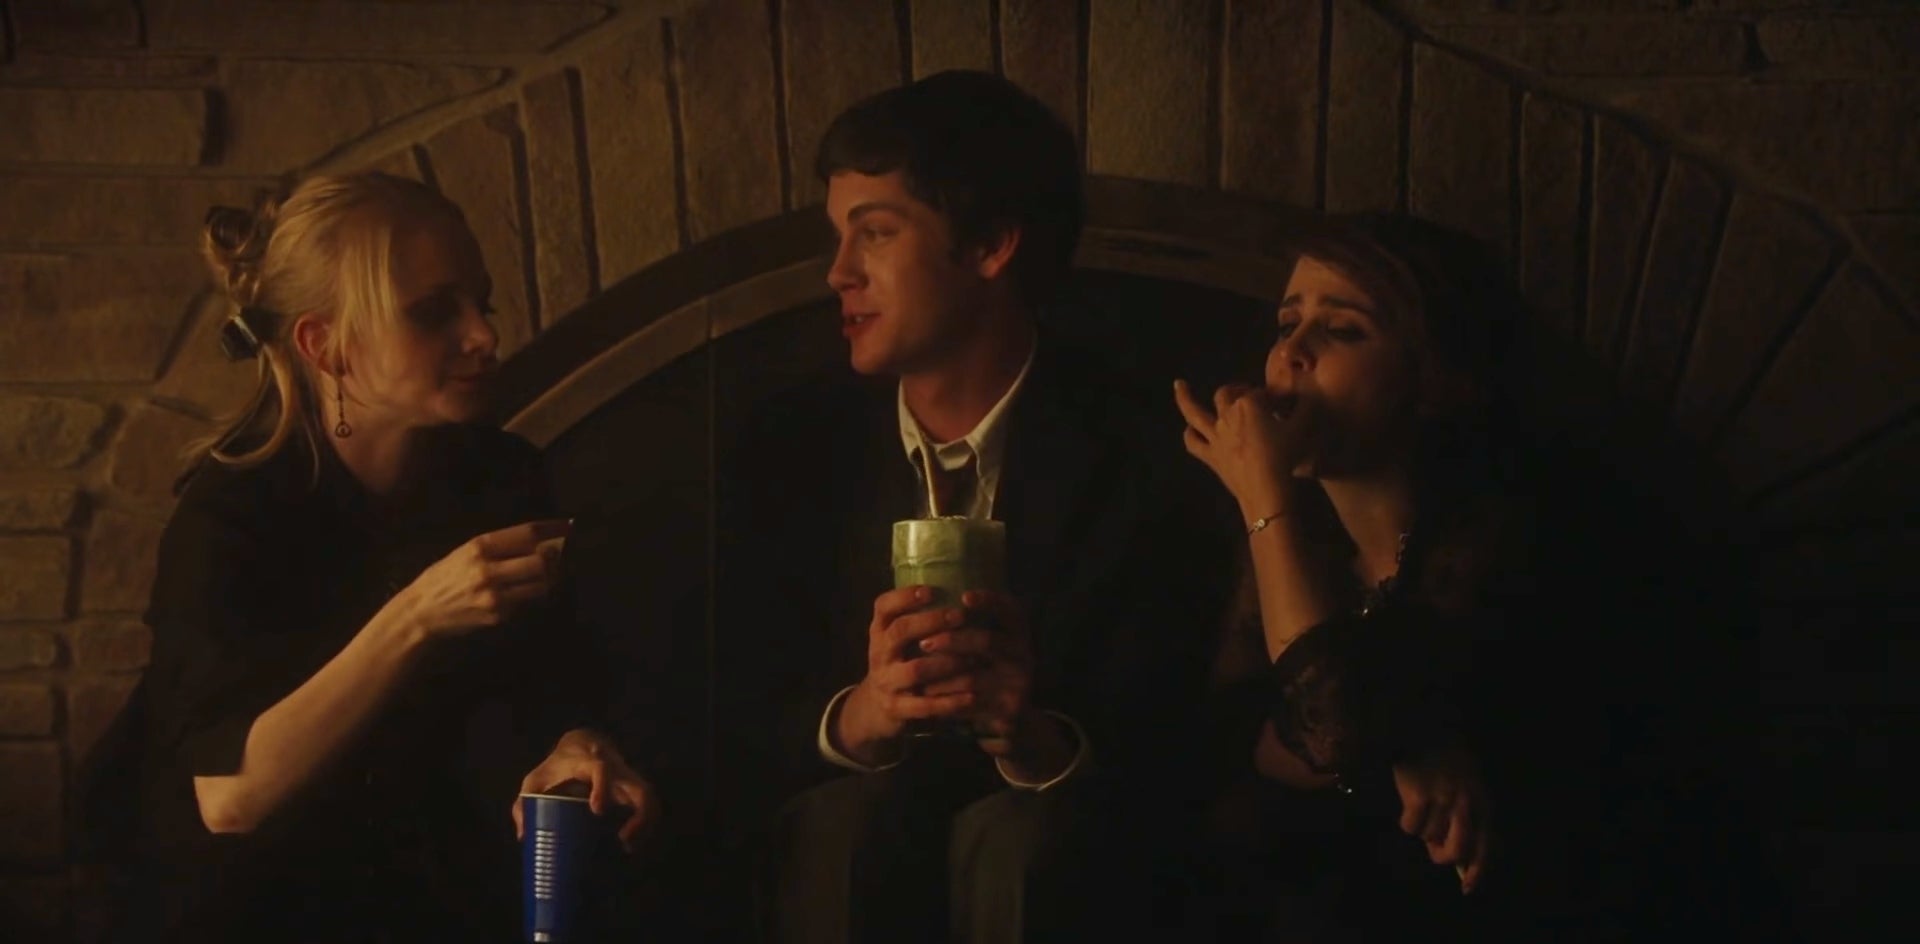 Charlie from &quot;The Perks of Being a Wallflower&quot; is socializing at a party